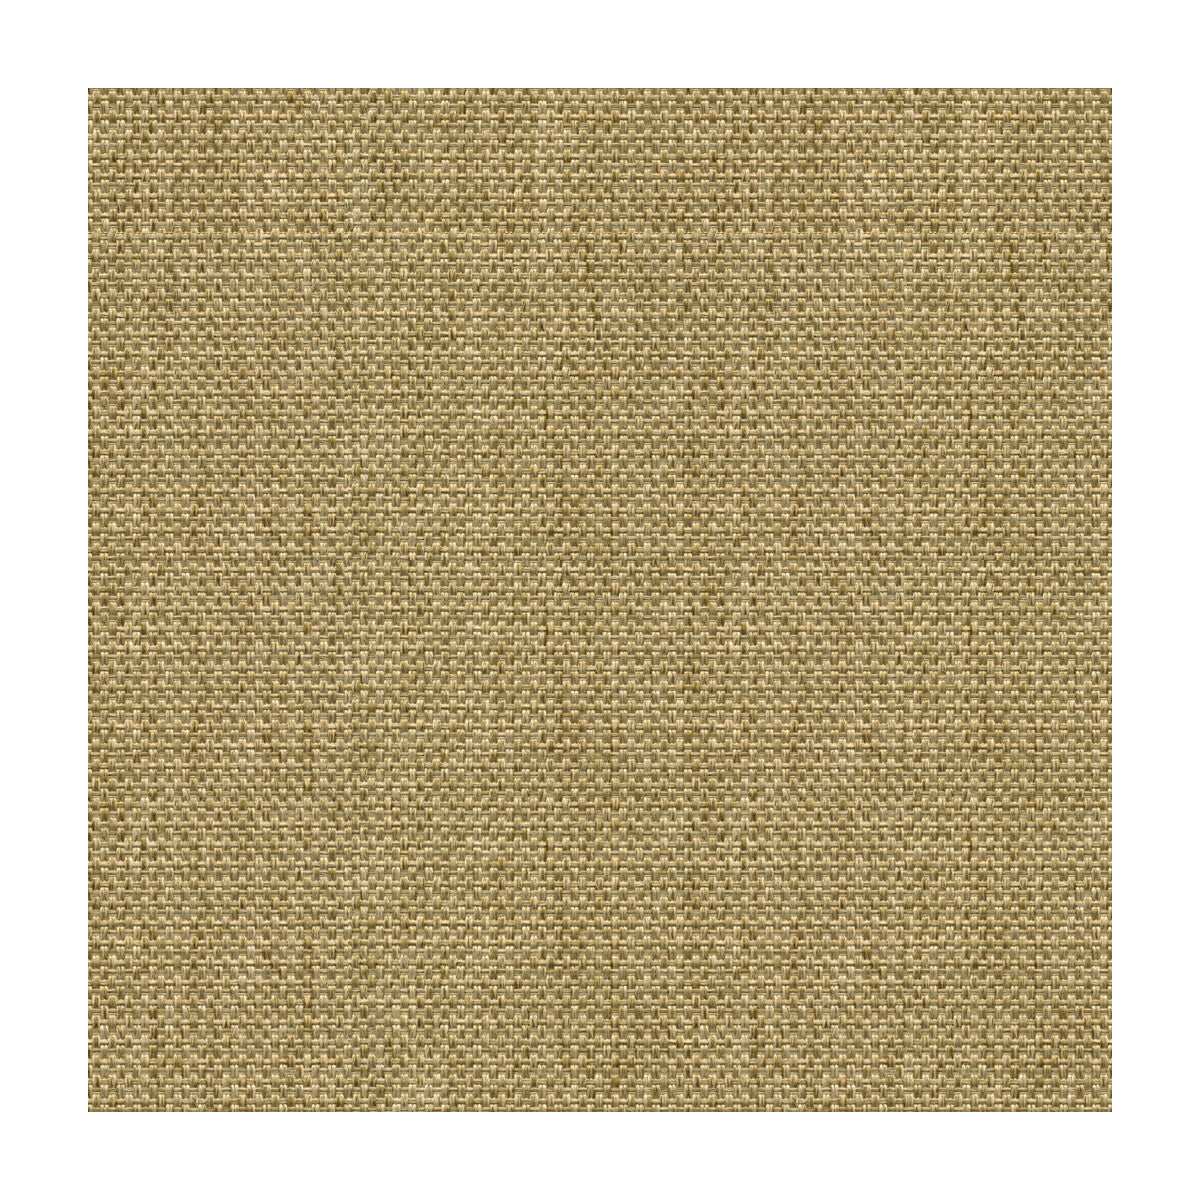 Ludwig fabric in jute color - pattern 34193.1616.0 - by Kravet Contract in the Crypton Incase collection